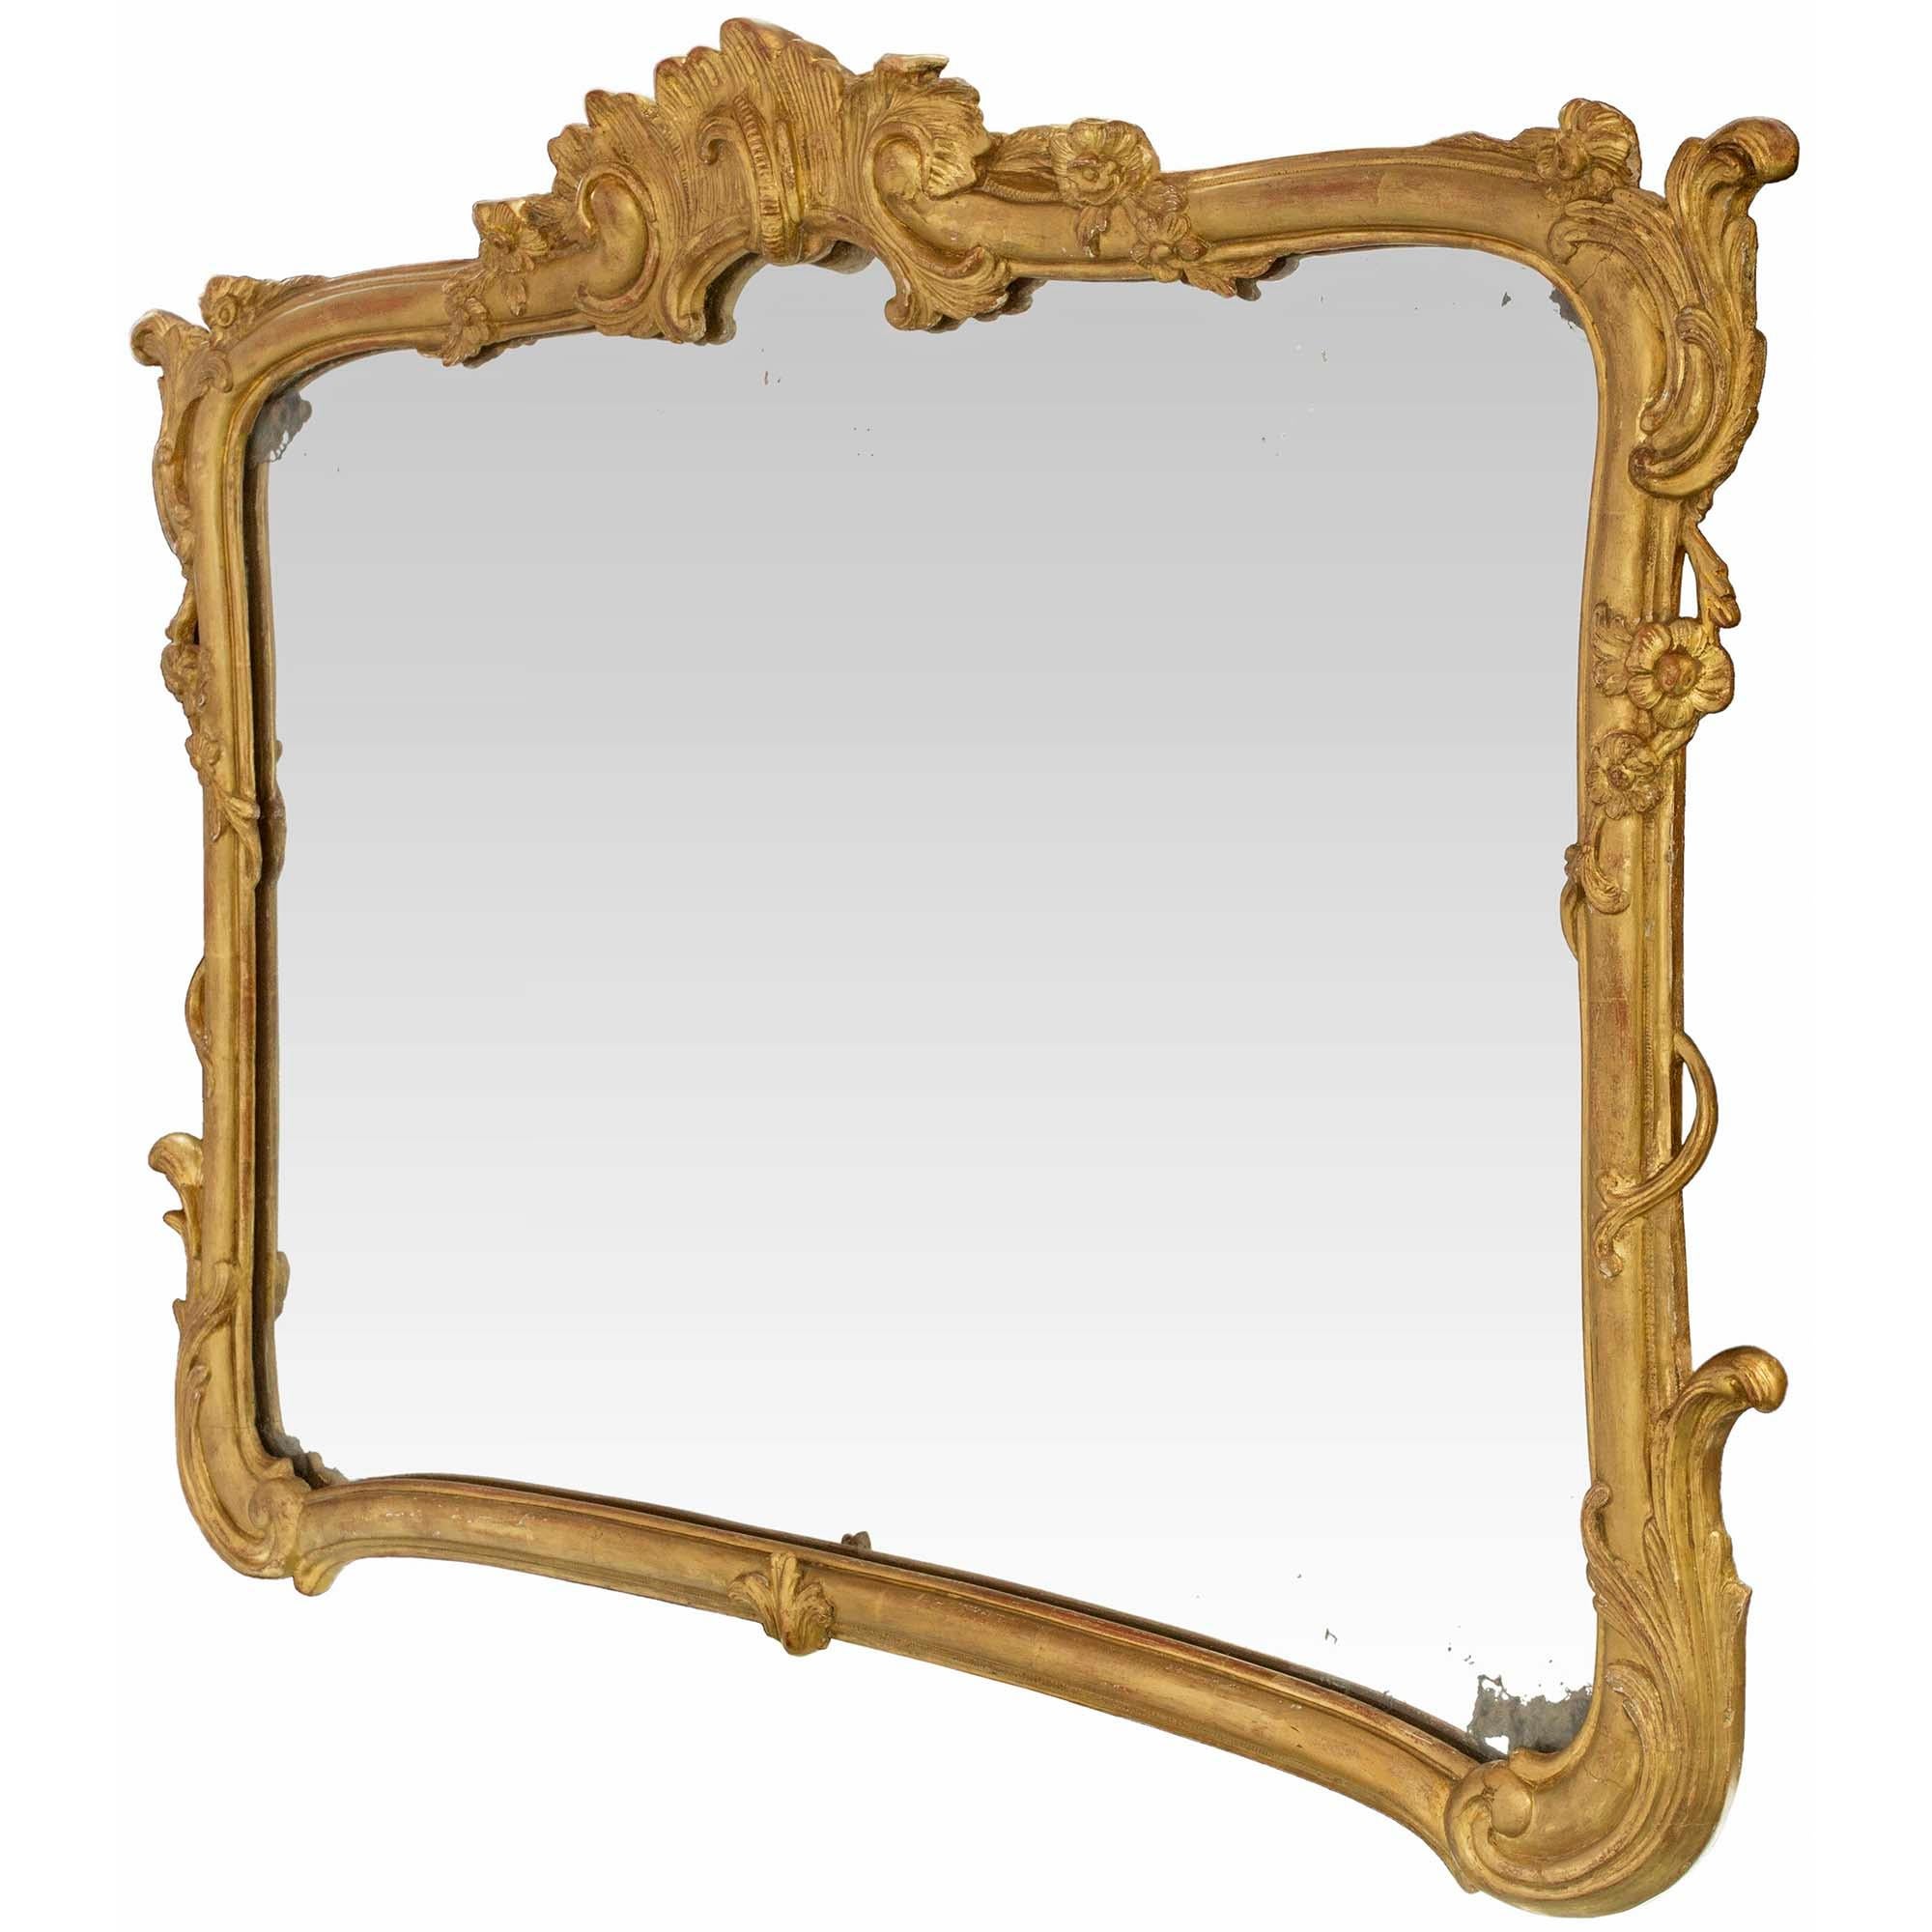 A wonderful Italian 19th century Louis XV st. giltwood mirror. The original mirror plate is framed within a fine mottled border with carved acanthus leaves and floral reserves. Above is the most decorative reeded top crown with beautiful floral